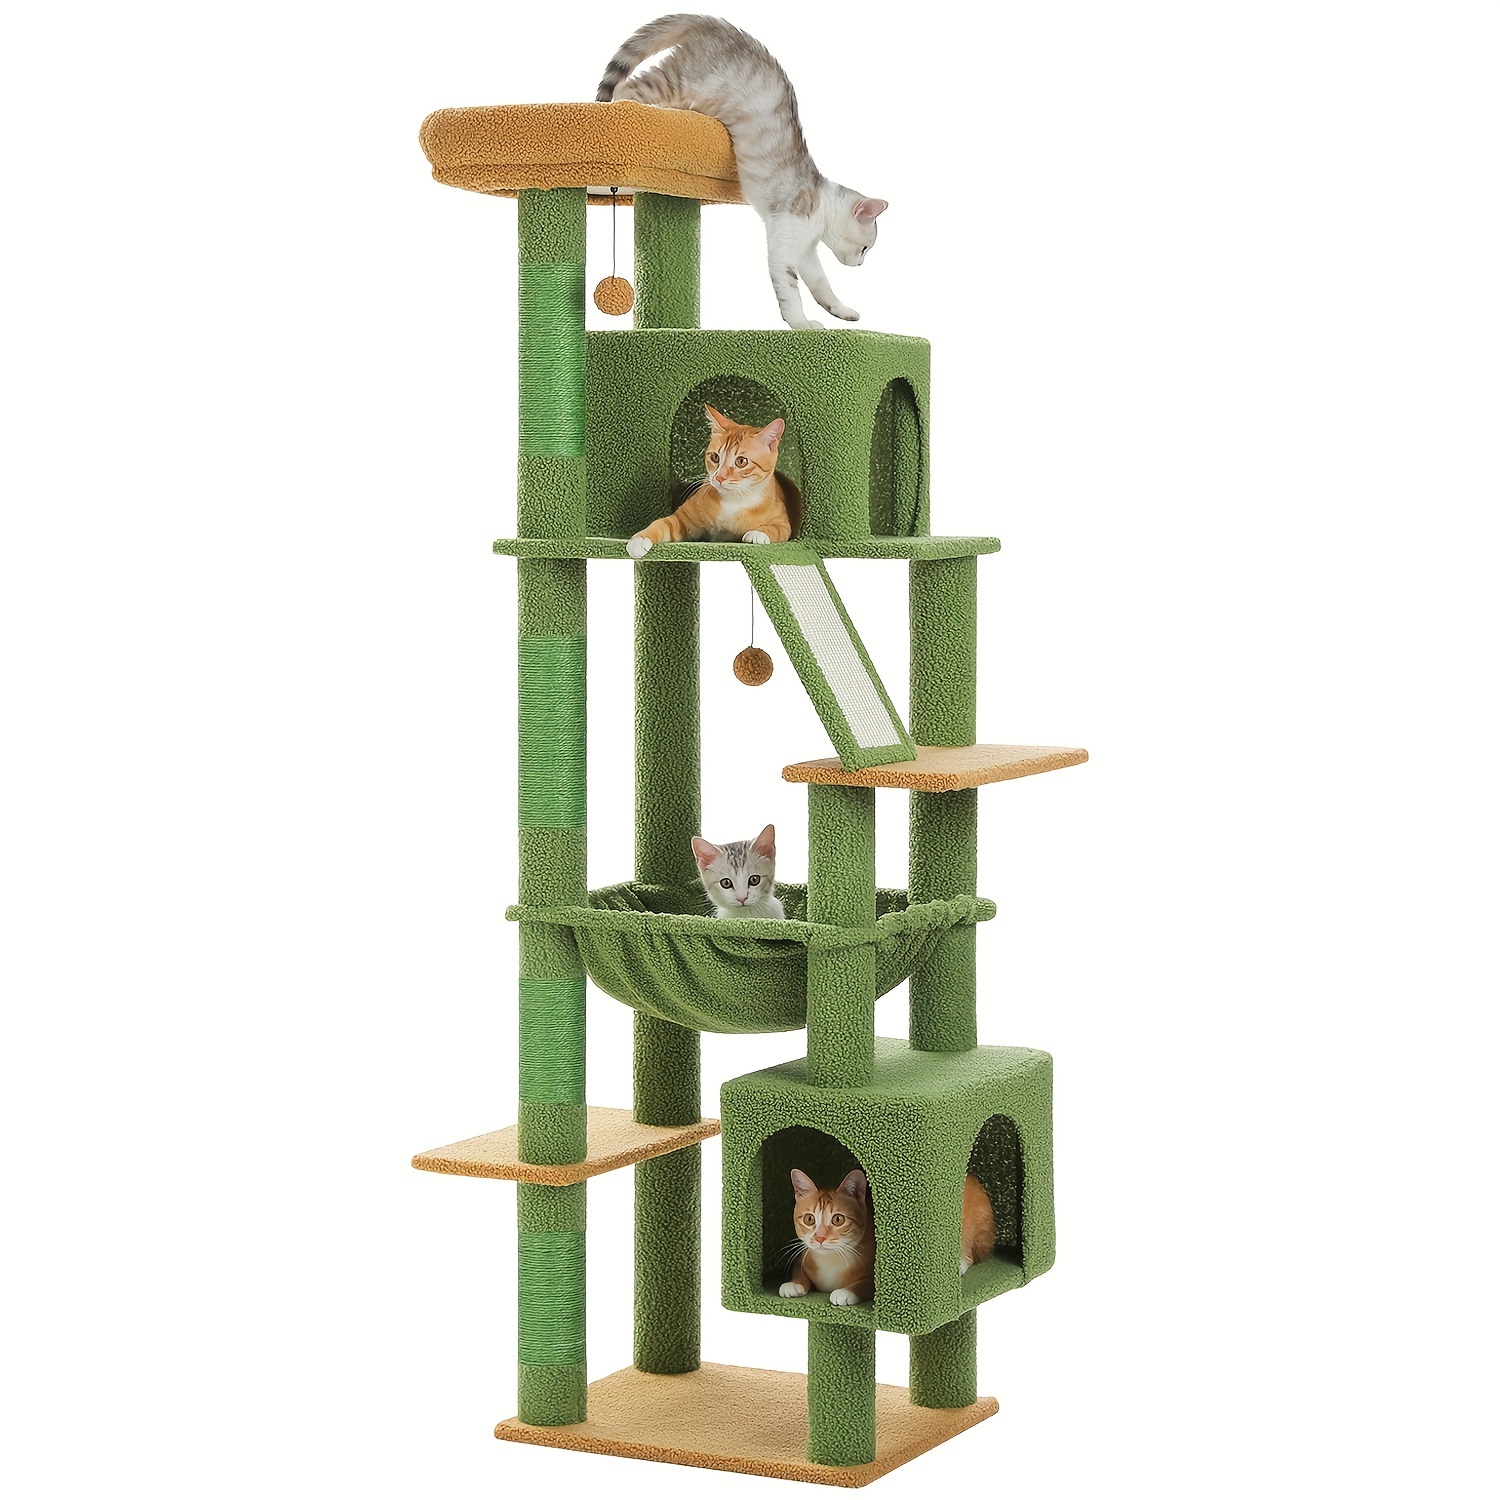 

Cat Tree, 71-inch Cat Tree Cat Tower For Indoor Cats, Plush Multi-level Cat Condo With 1 Perches, Basket, 2 Caves, Hammock, 2 Pompoms, Green